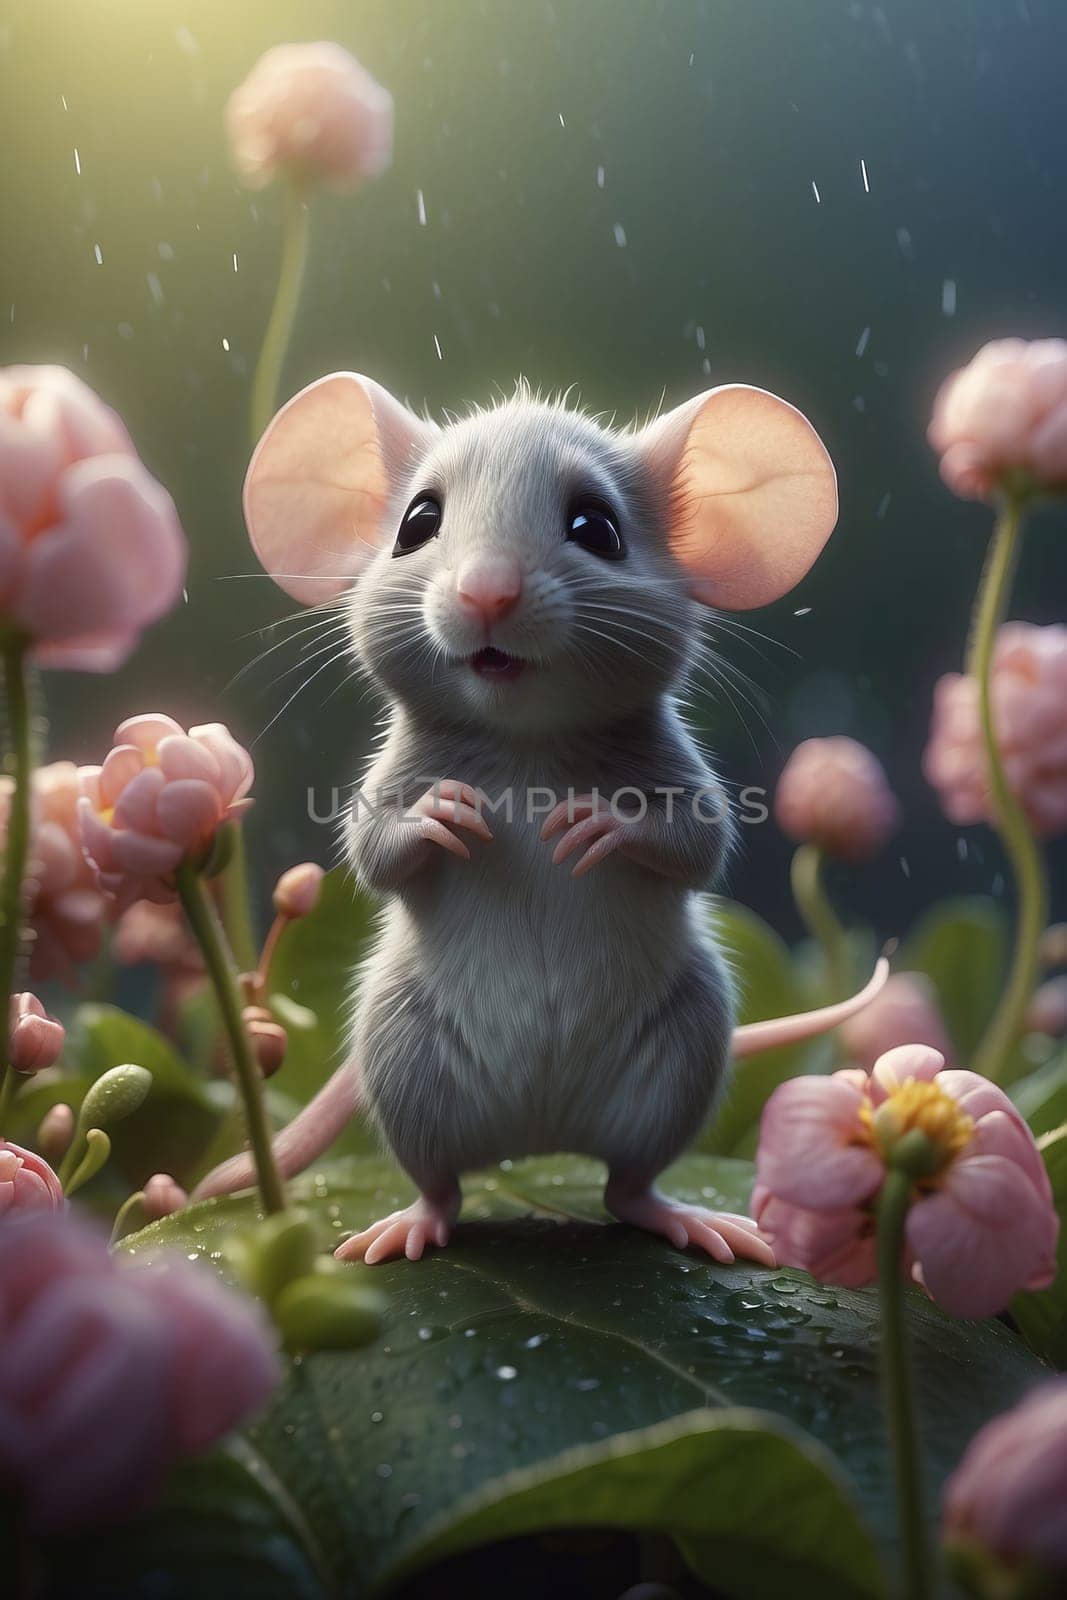 Cute little mouse standing under a flower by applesstock